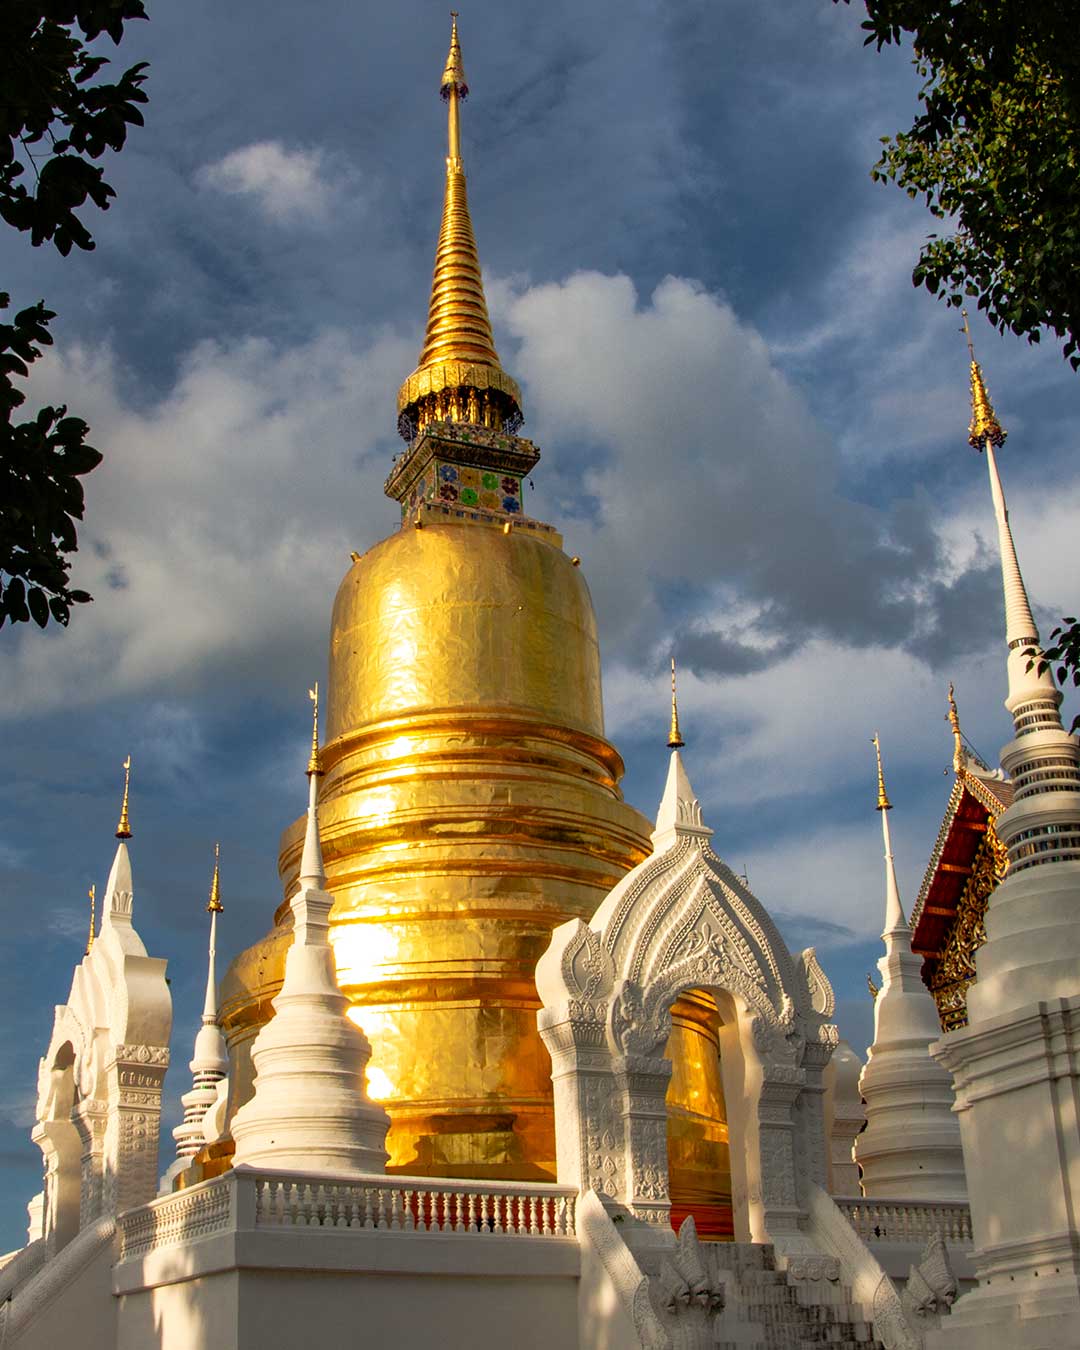 Wat Suan dok, was built by the Lanna King Kue Na in the year 1370